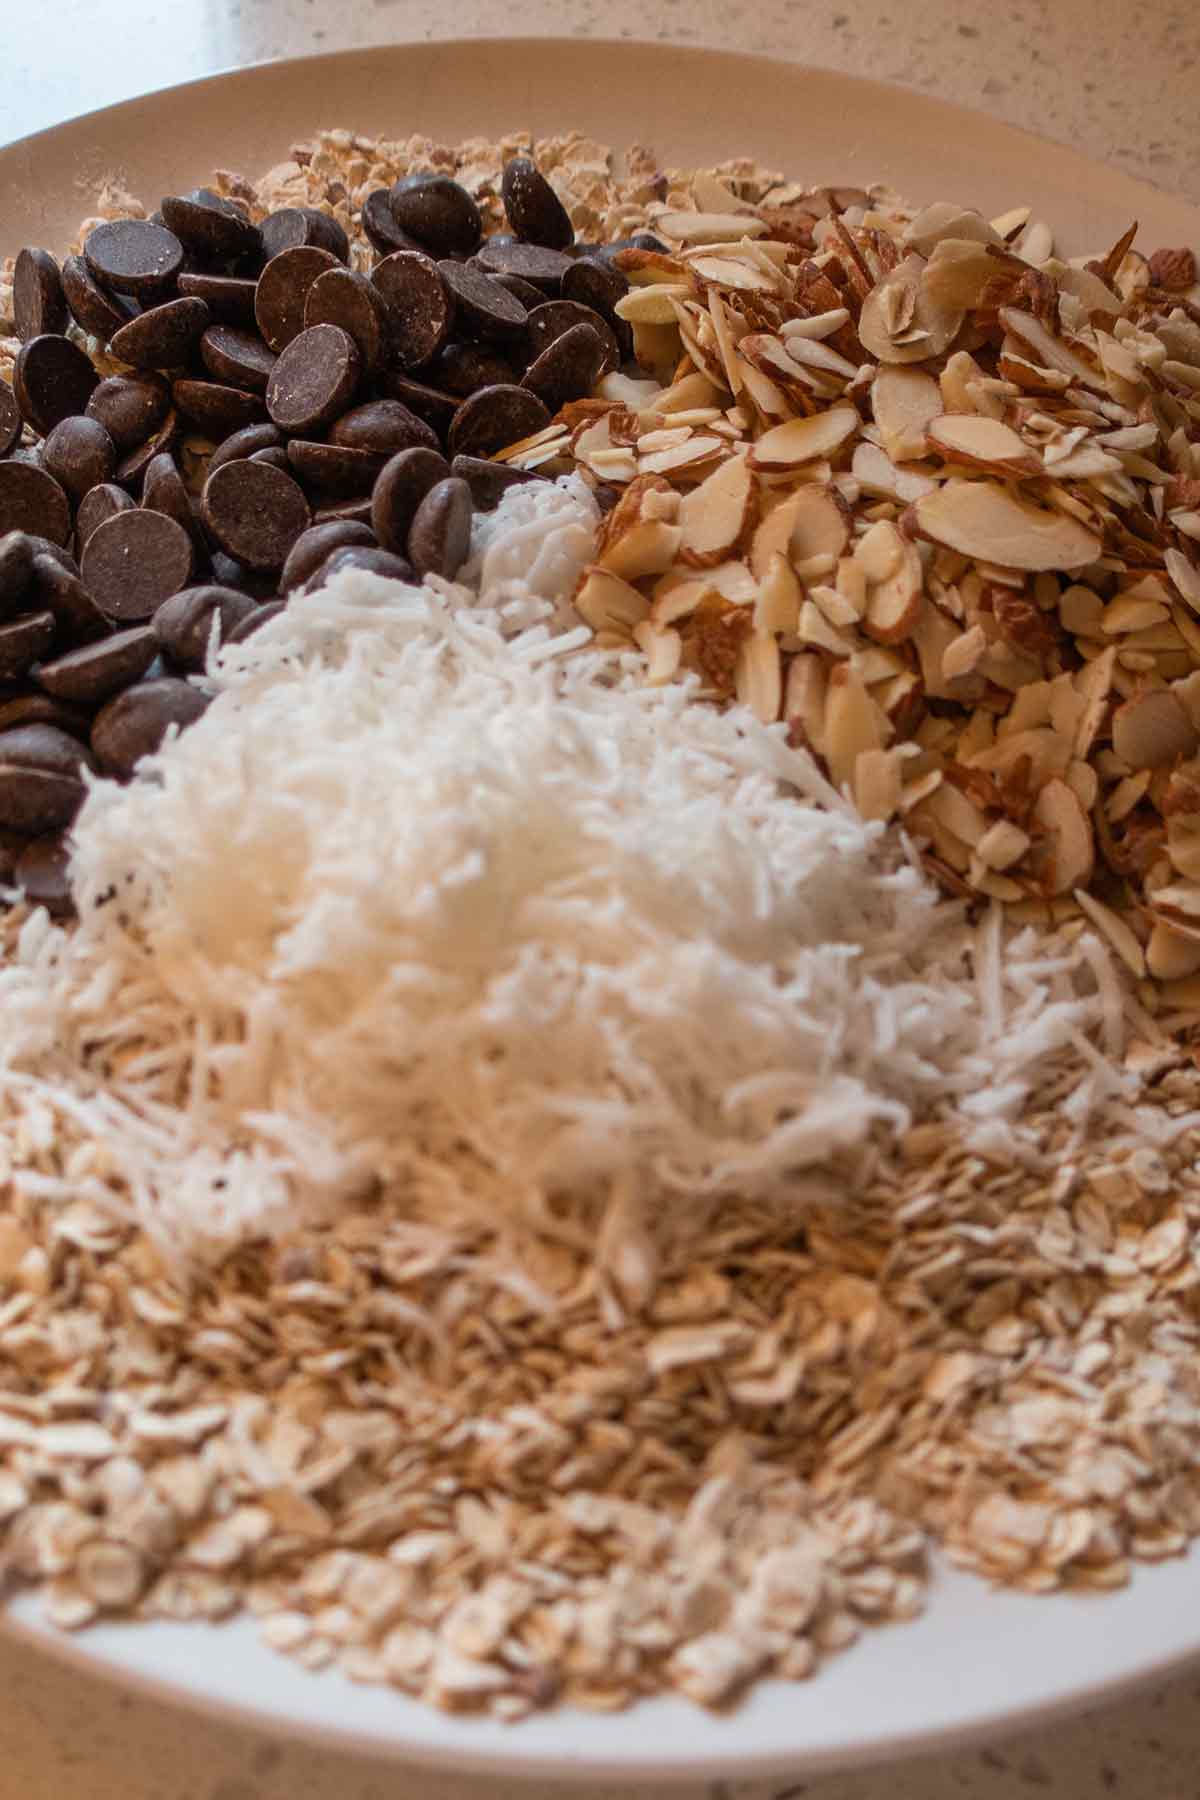 oats, chocolate chips, shredded coconut, and nuts on a plate